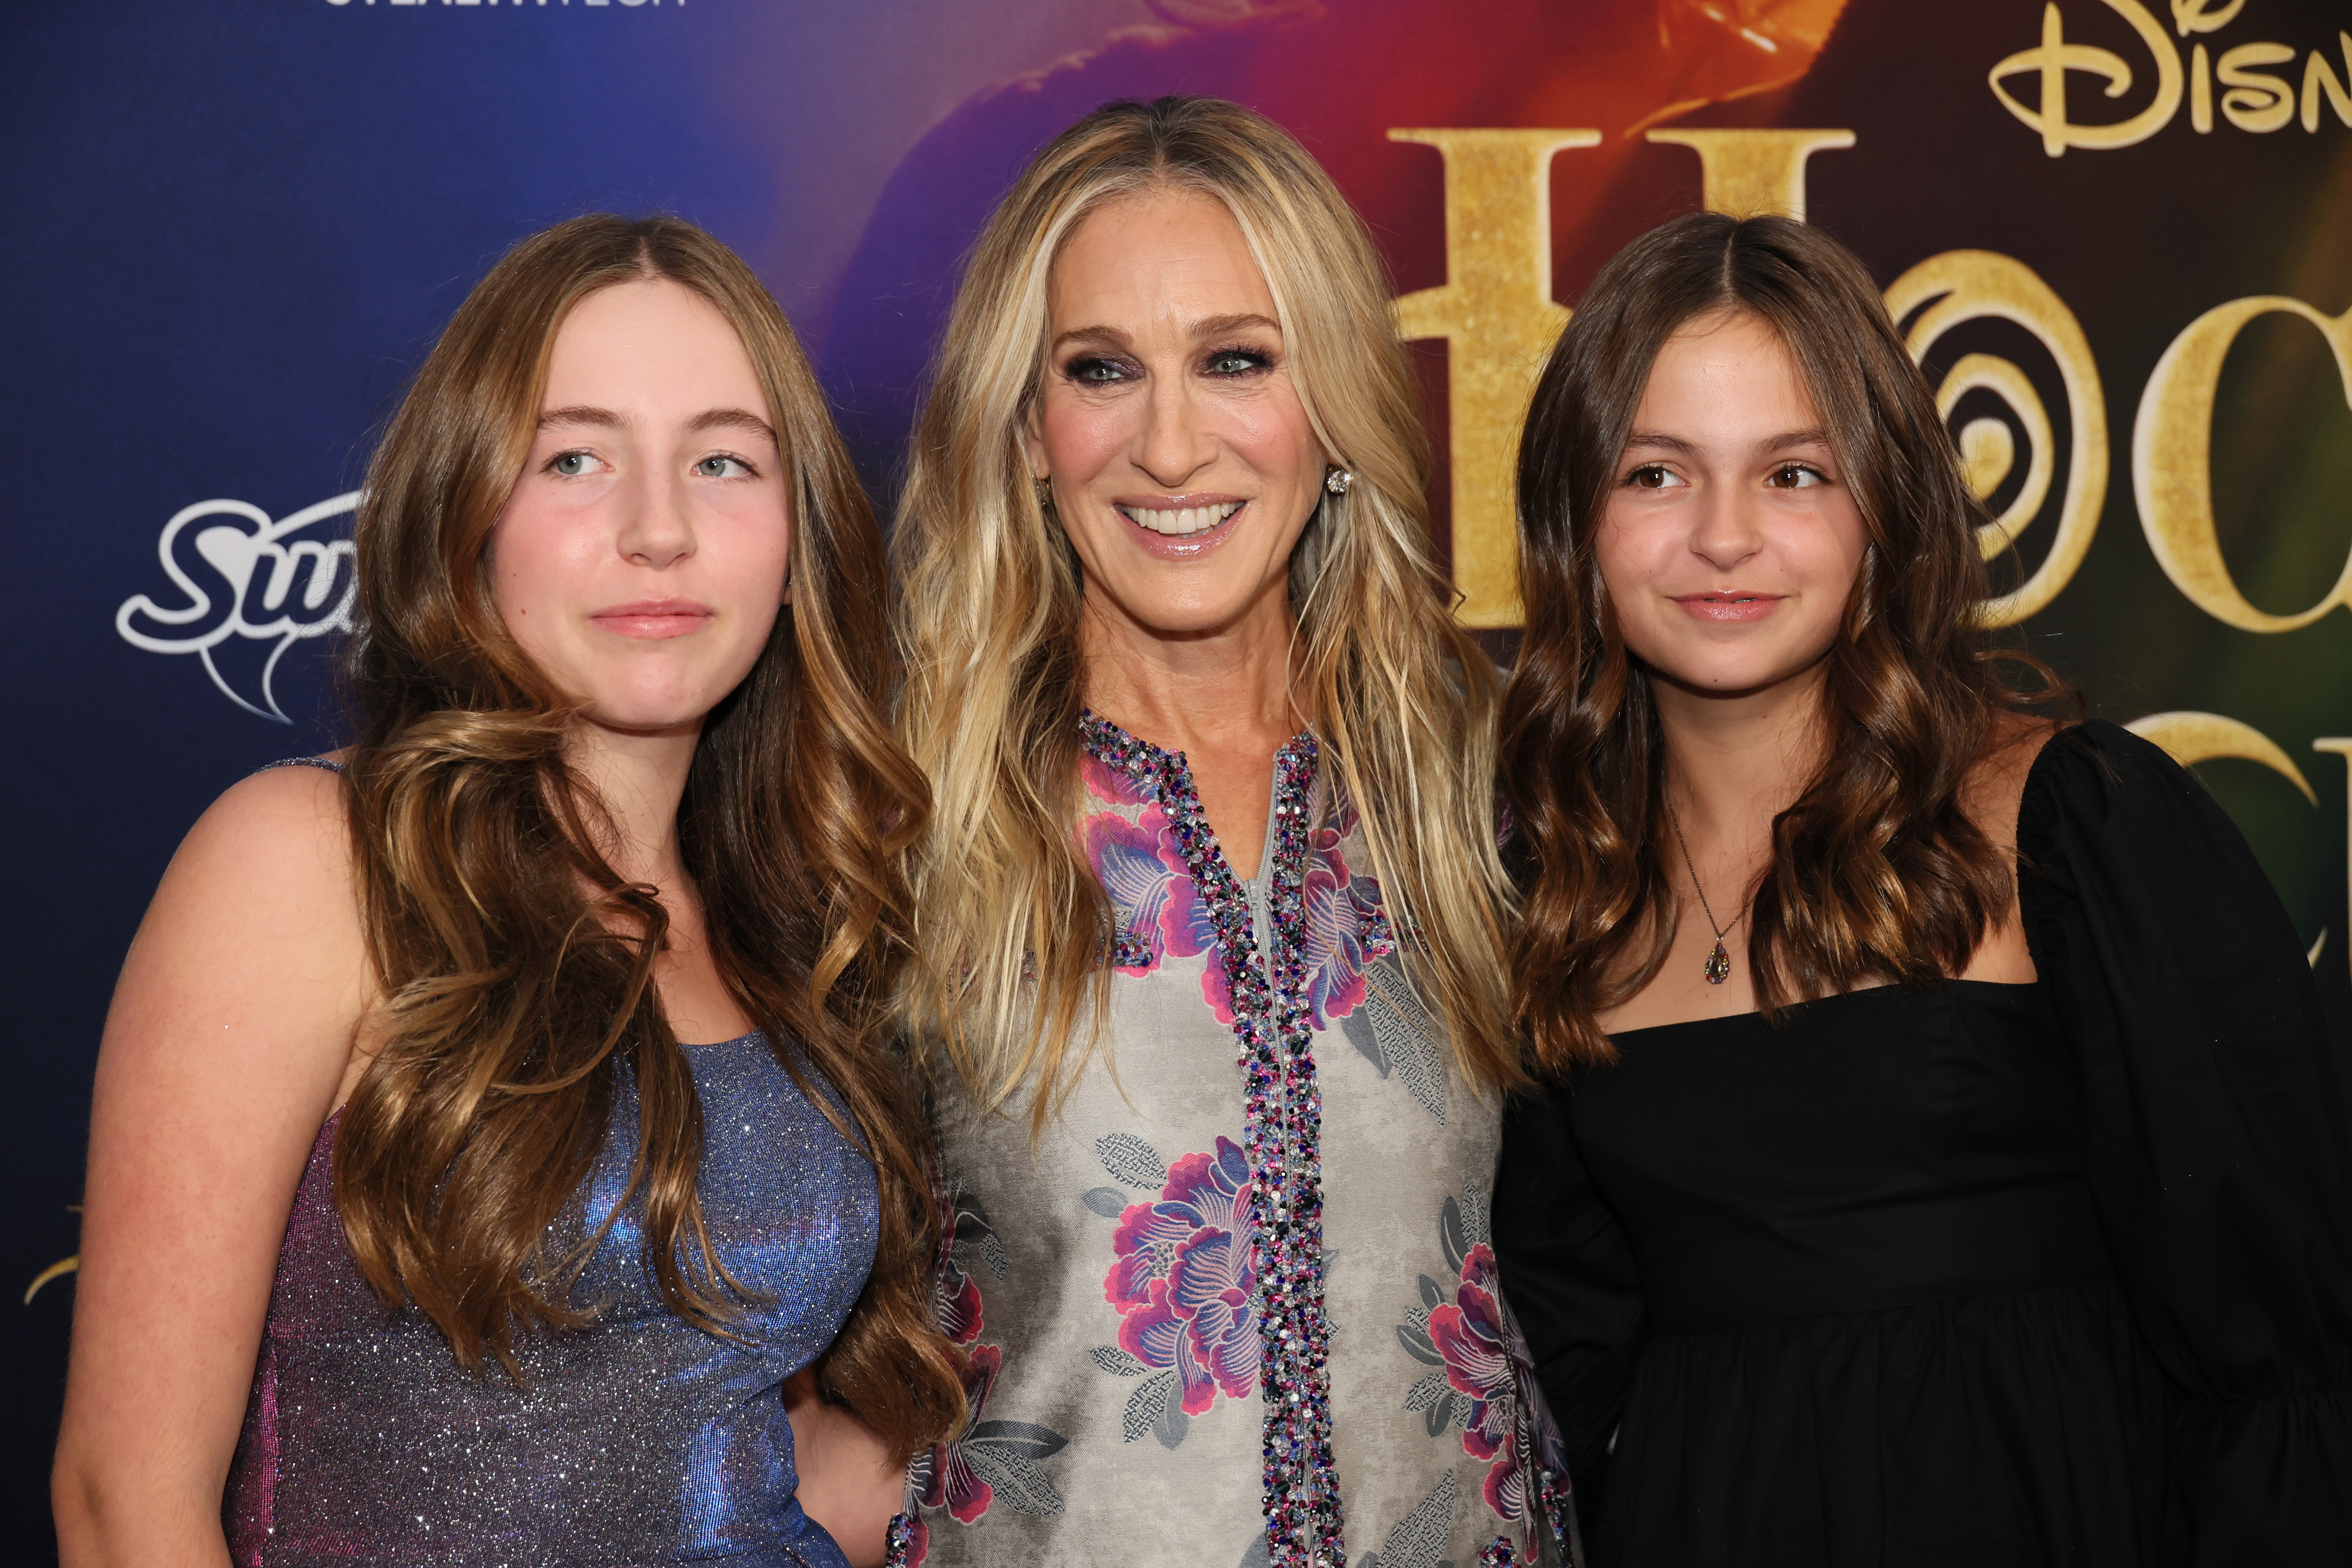 Marion Broderick, Sarah Jessica Parker and Tabitha Broderick at the premiere of "Hocus Pocus 2," 2022 | Source: Getty Images